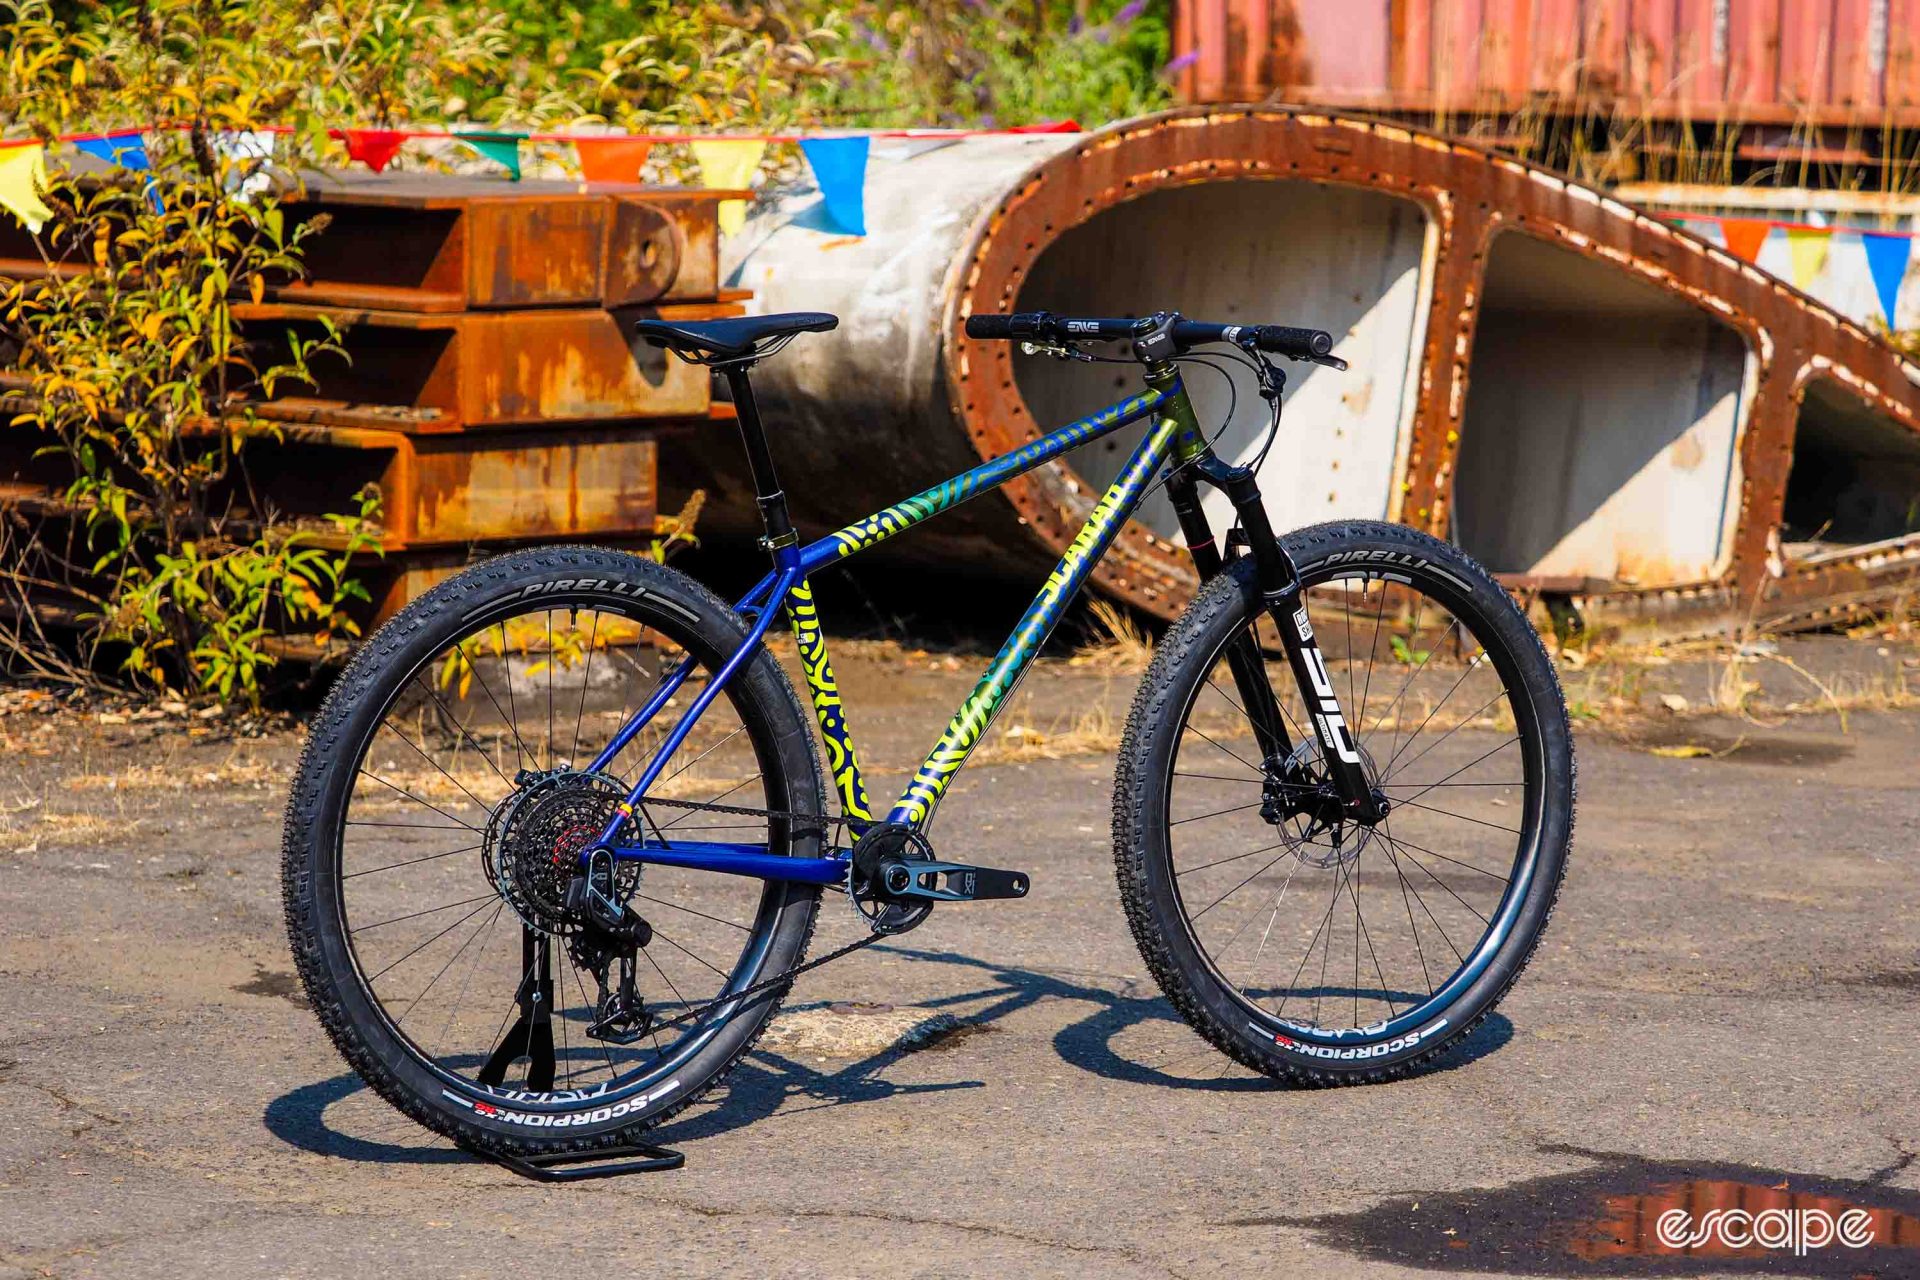 Scarab hardtail profile shot, showing an elaborate blue, green and yellow finish. 